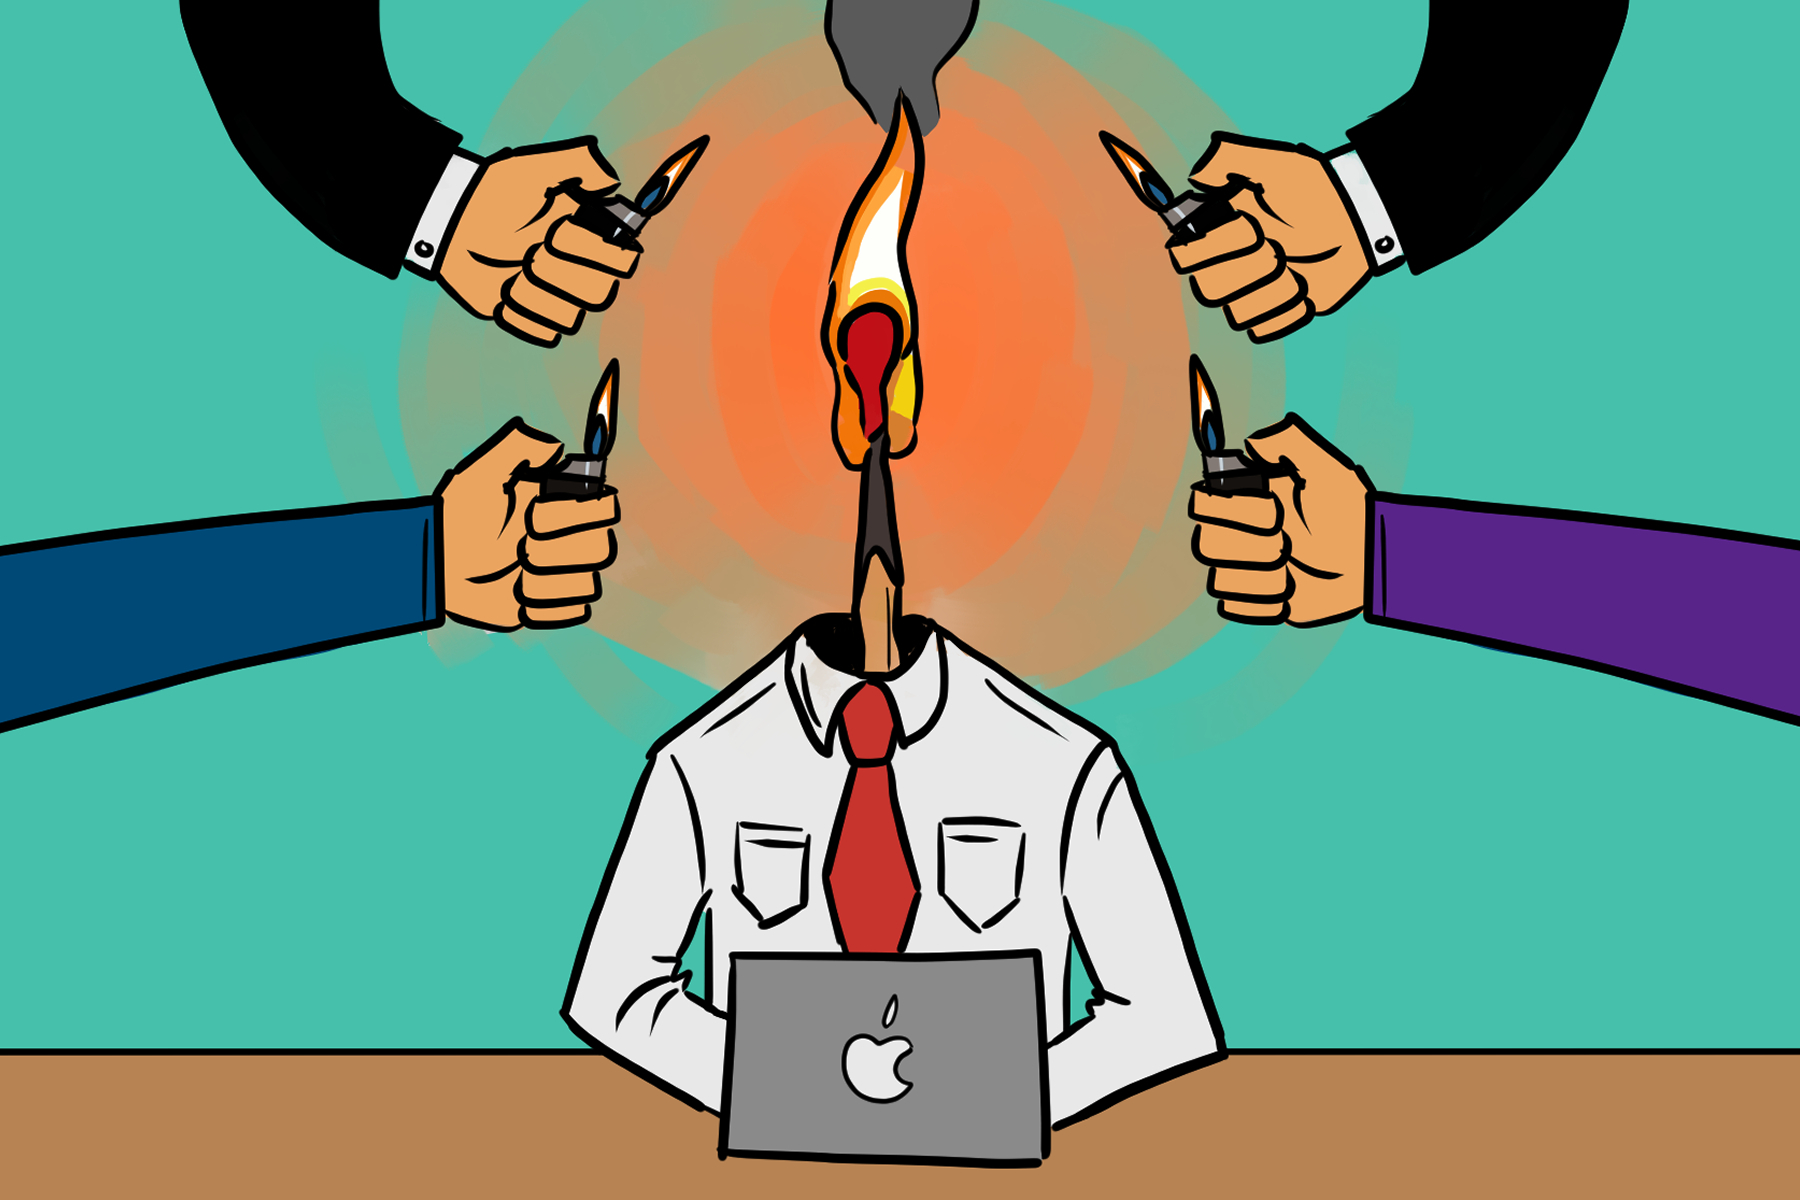 In an article about burnout, an illustration of a humanoid match being lit by multiple hands.